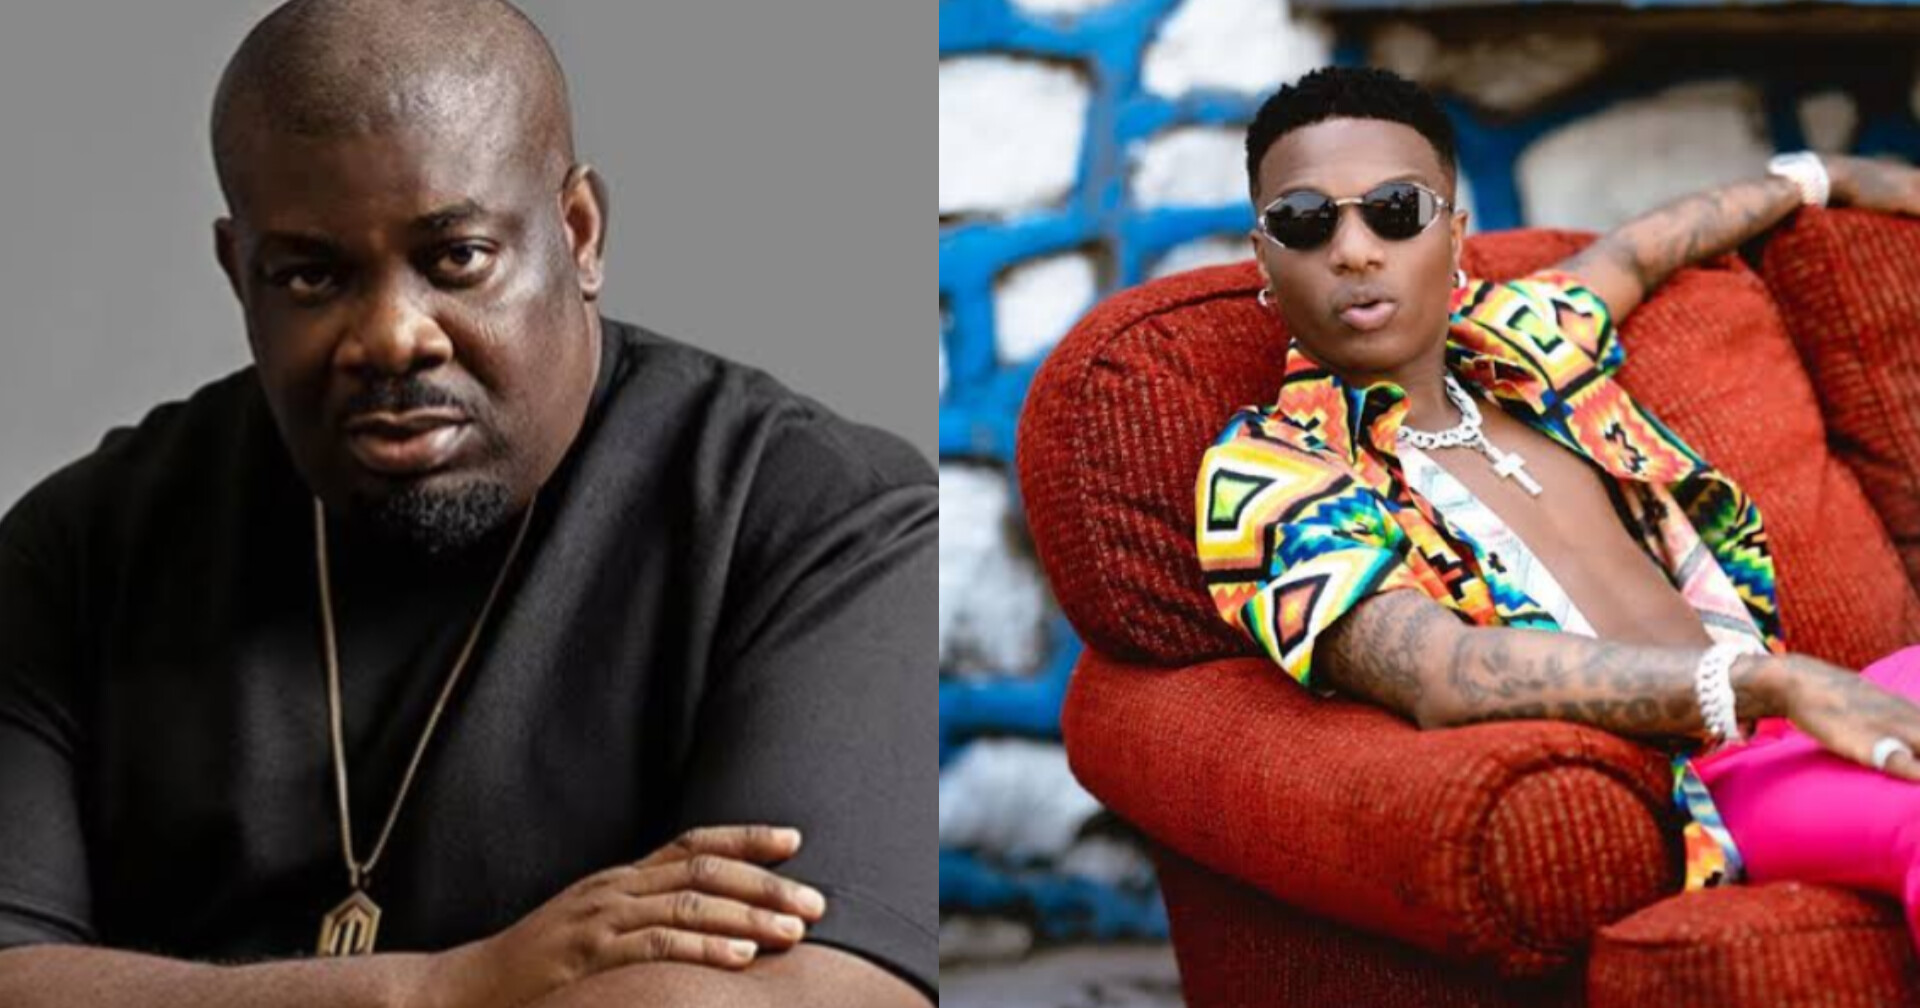 Don Jazzy blast and react Wizkid by action after wizkid shaded him 